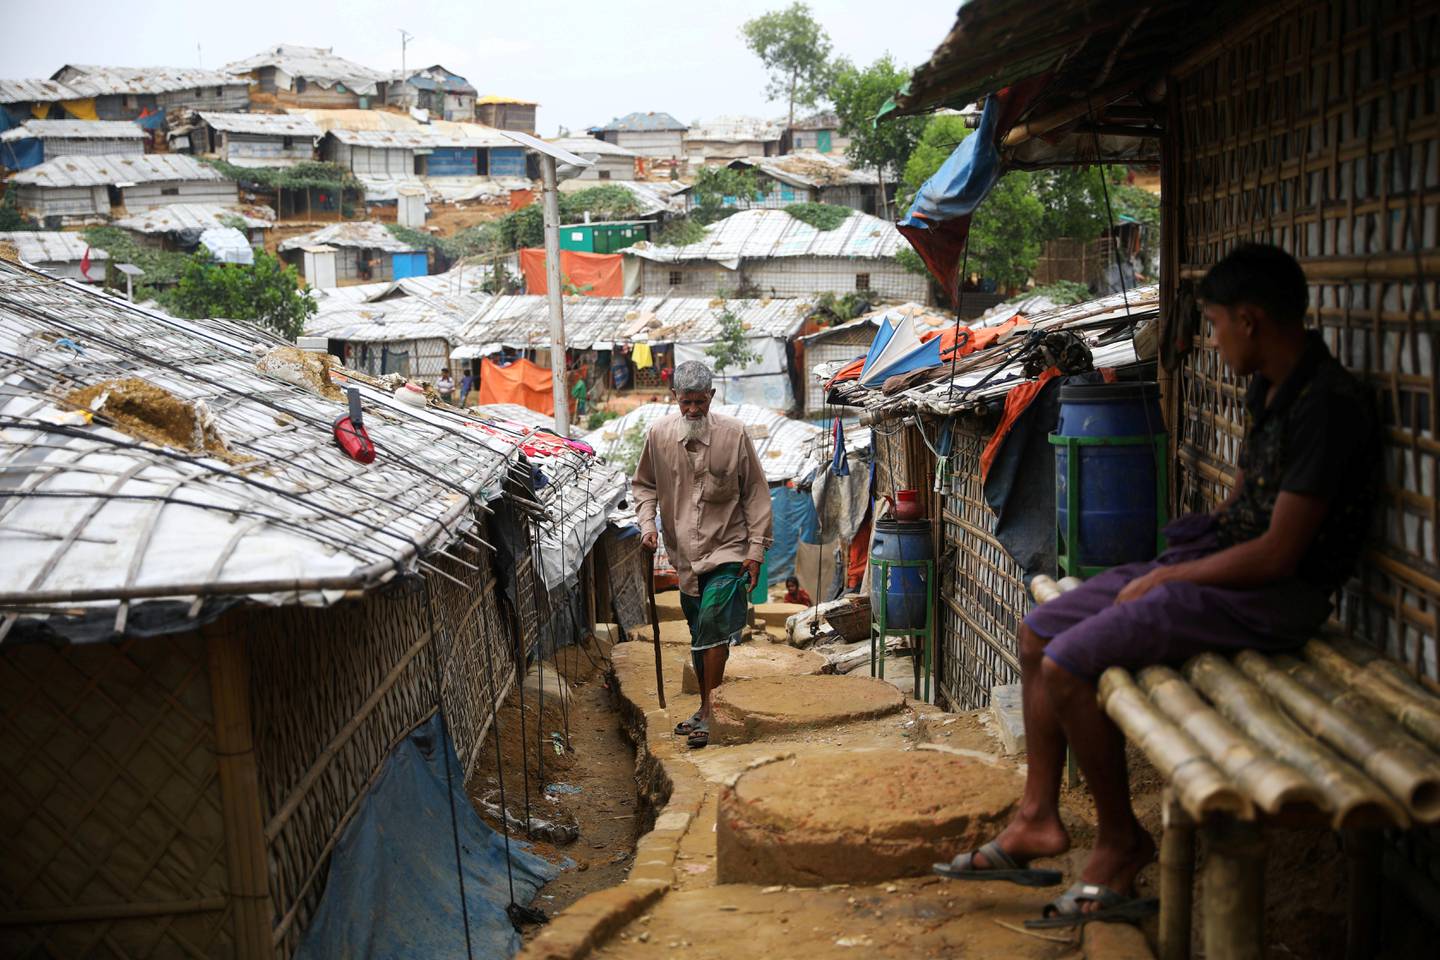 FILE PHOTO: A Rohingya refugee walks at a refugee camp in Cox's Bazar, Bangladesh, March 7, 2019. REUTERS/Mohammad Ponir Hossain -/File Photo